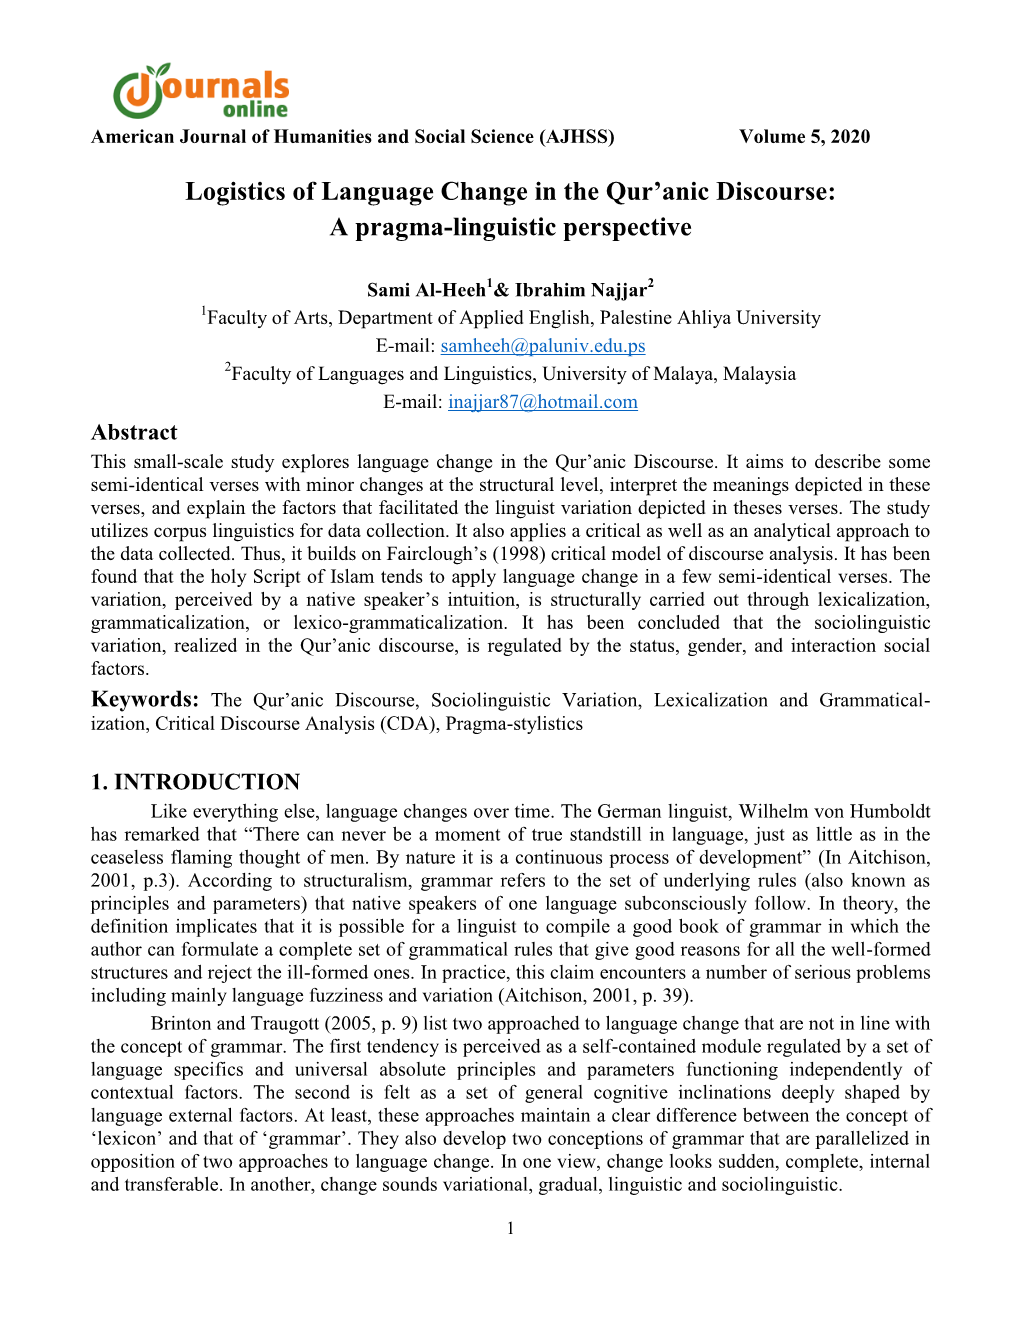 Logistics of Language Change in the Qur'anic Discourse